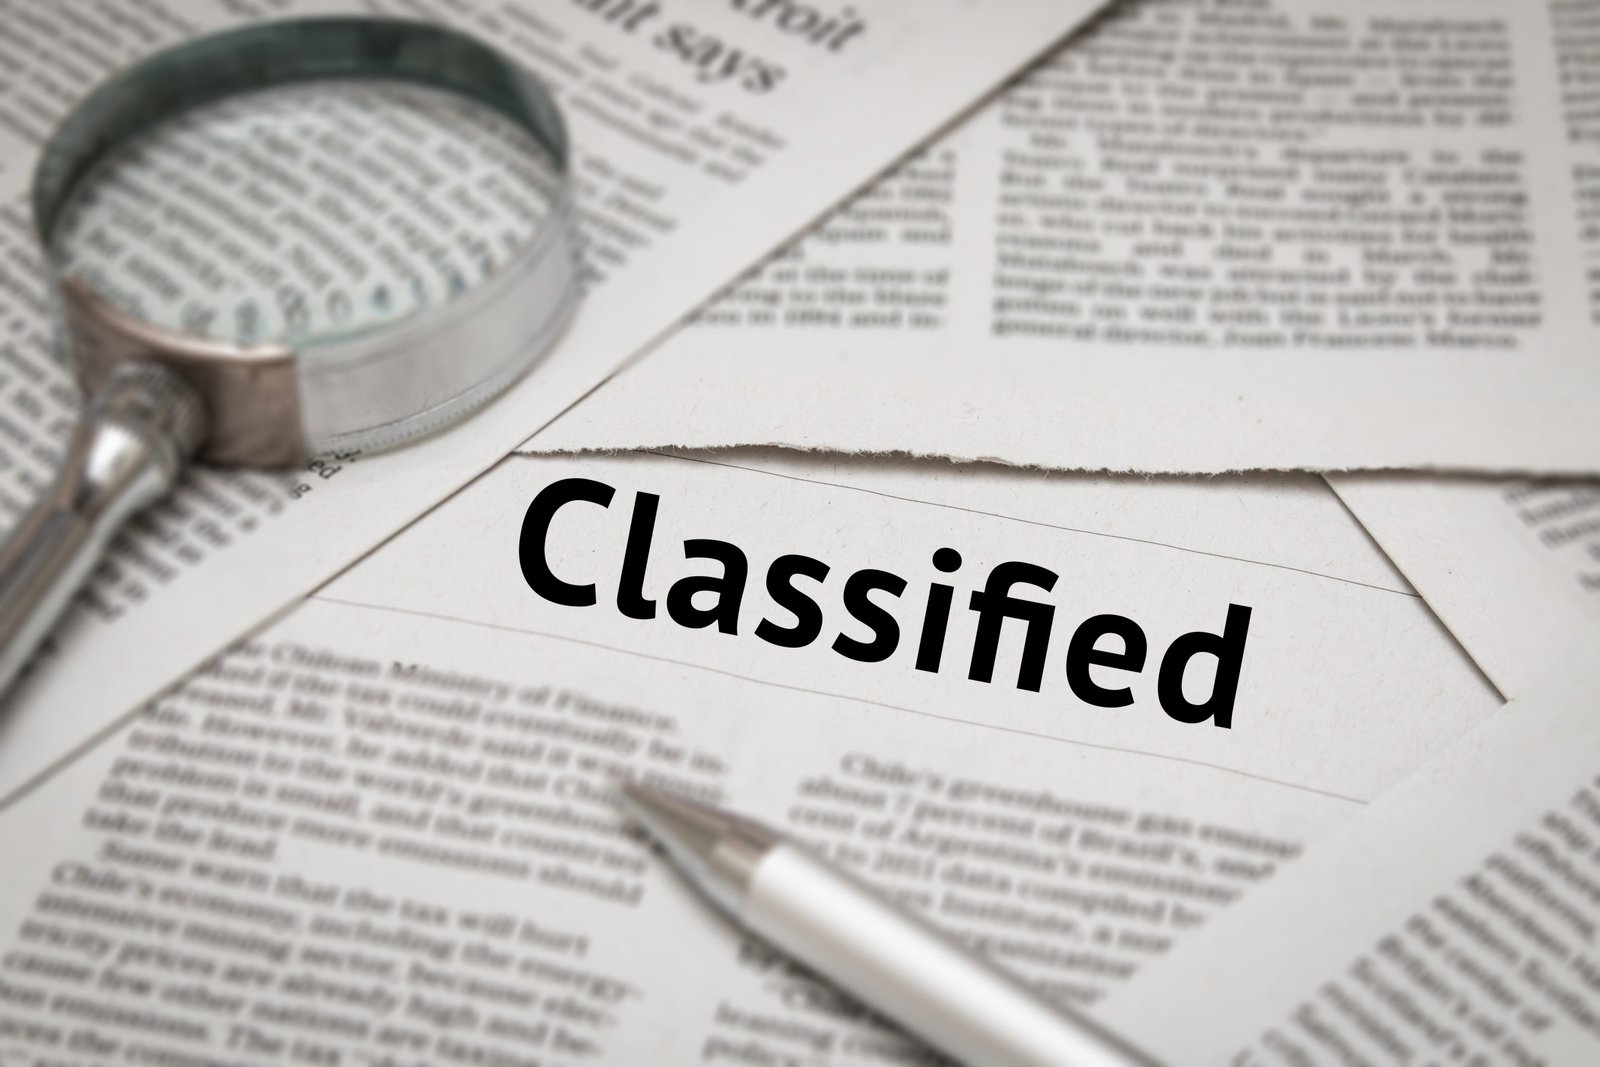 Benefits of Posting Classified Ads